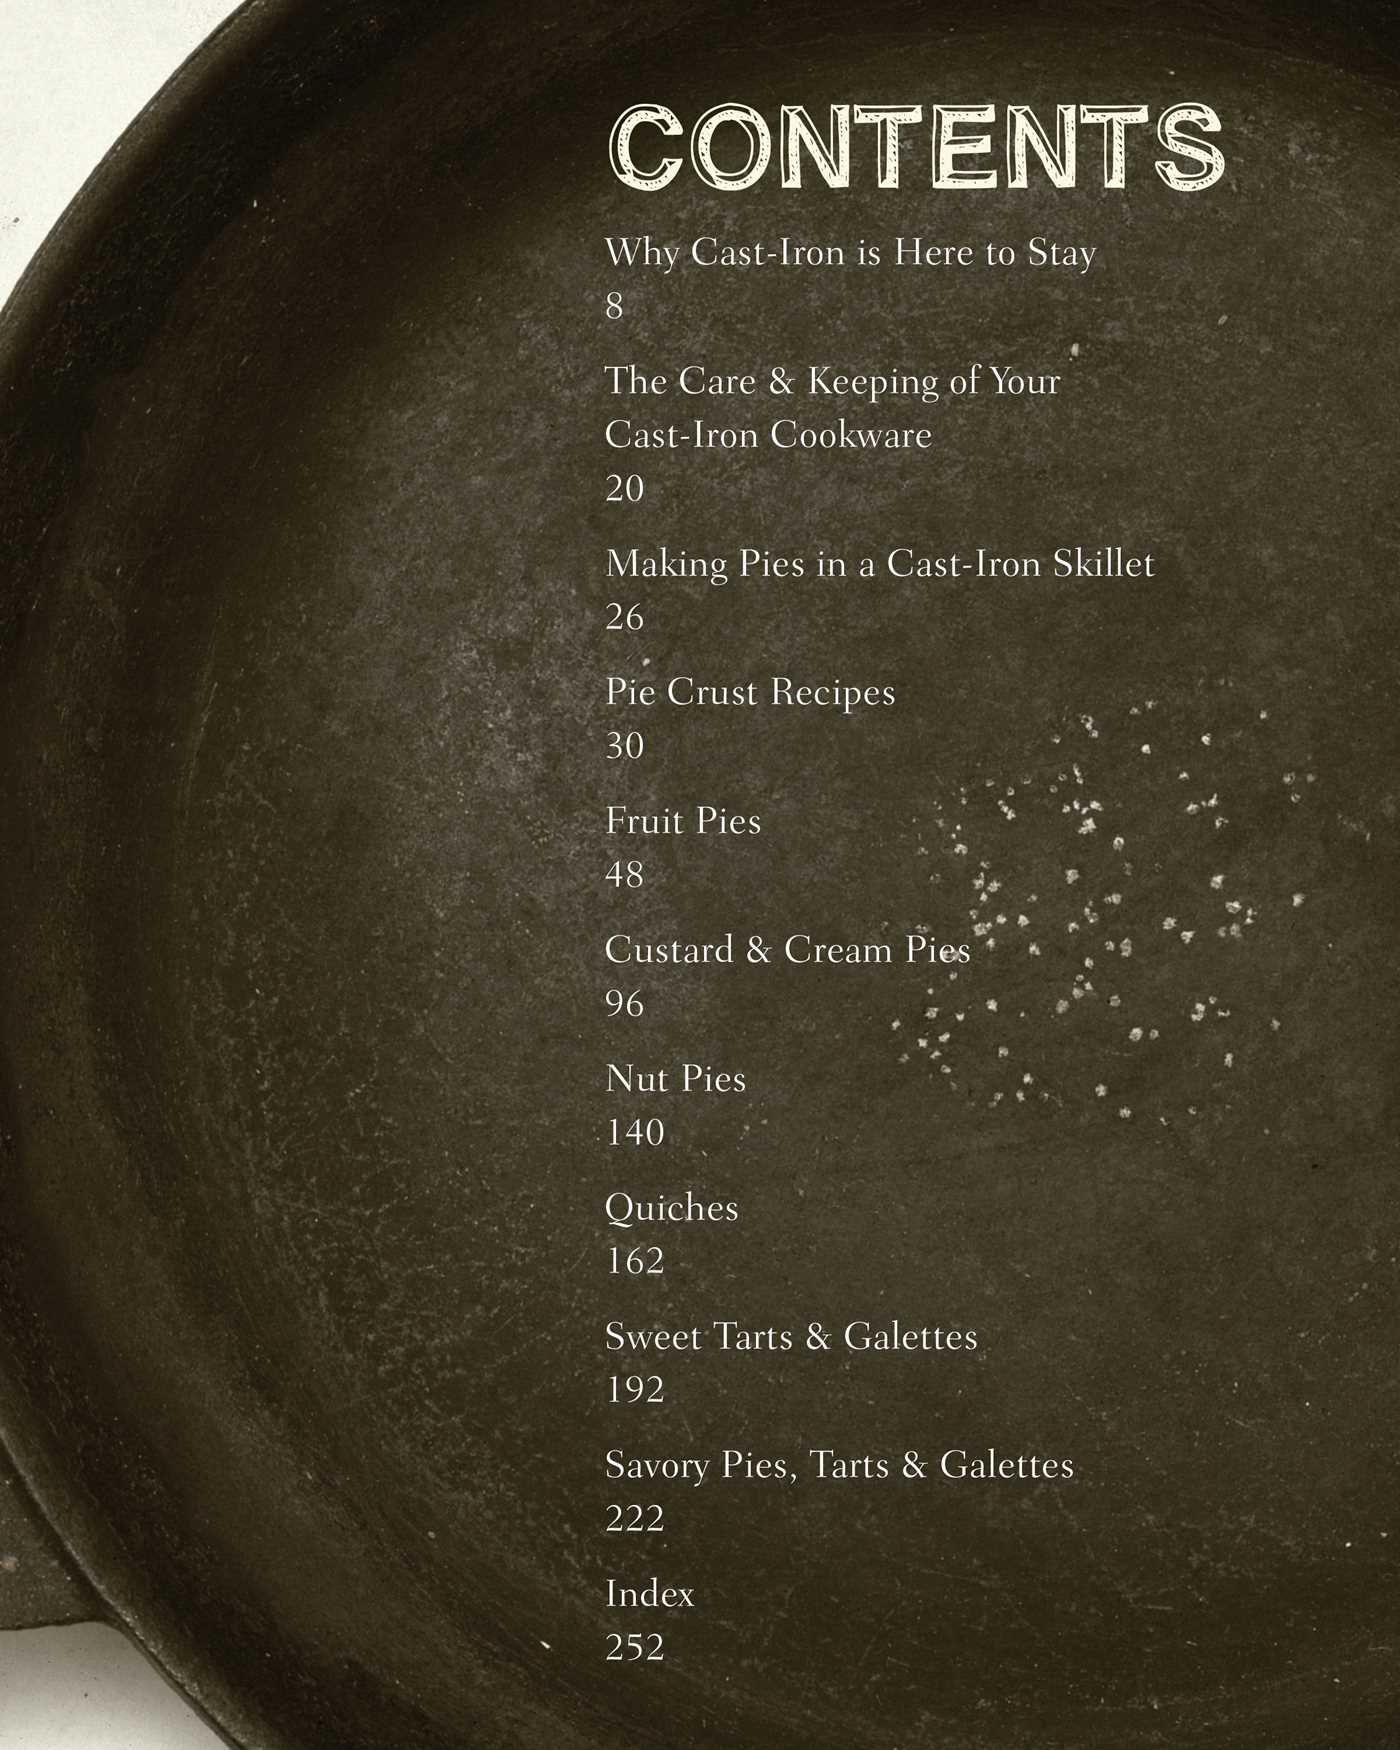 The Cast Iron Pies Cookbook: 101 Delicious Pie Recipes for Your Cast-Iron Cookware